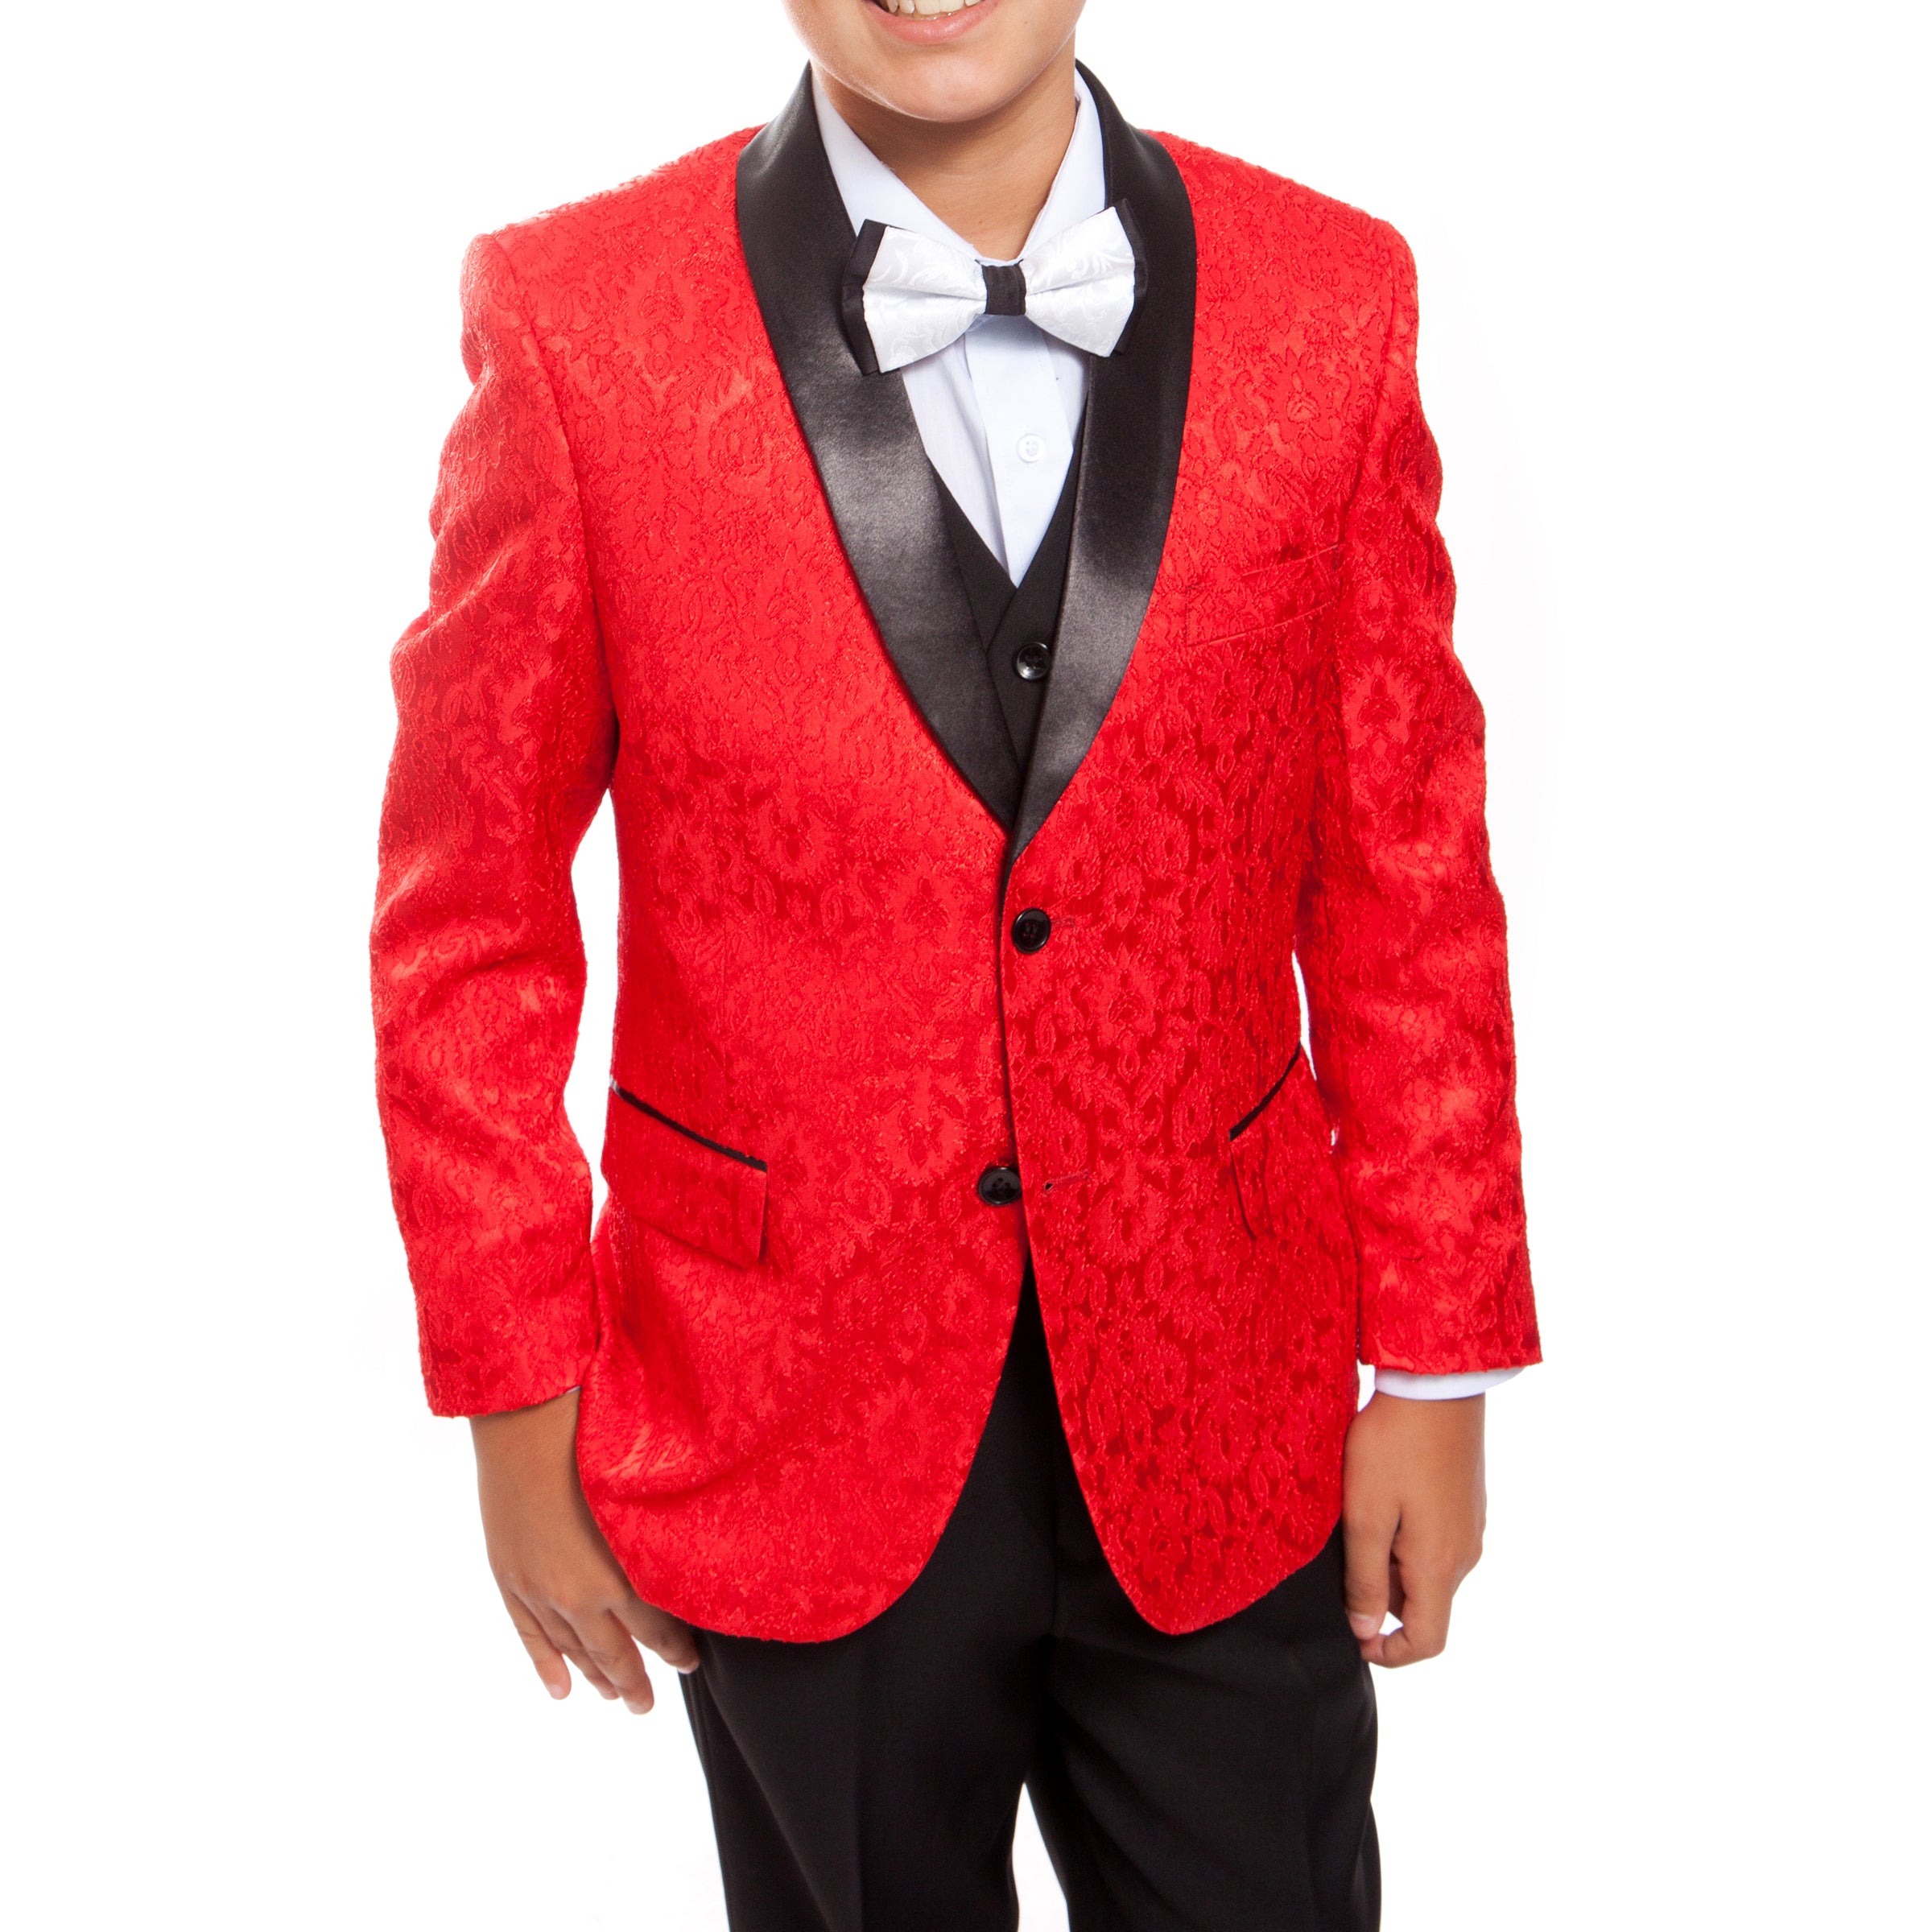 Tazio Red / Black Formal Suits For Boys